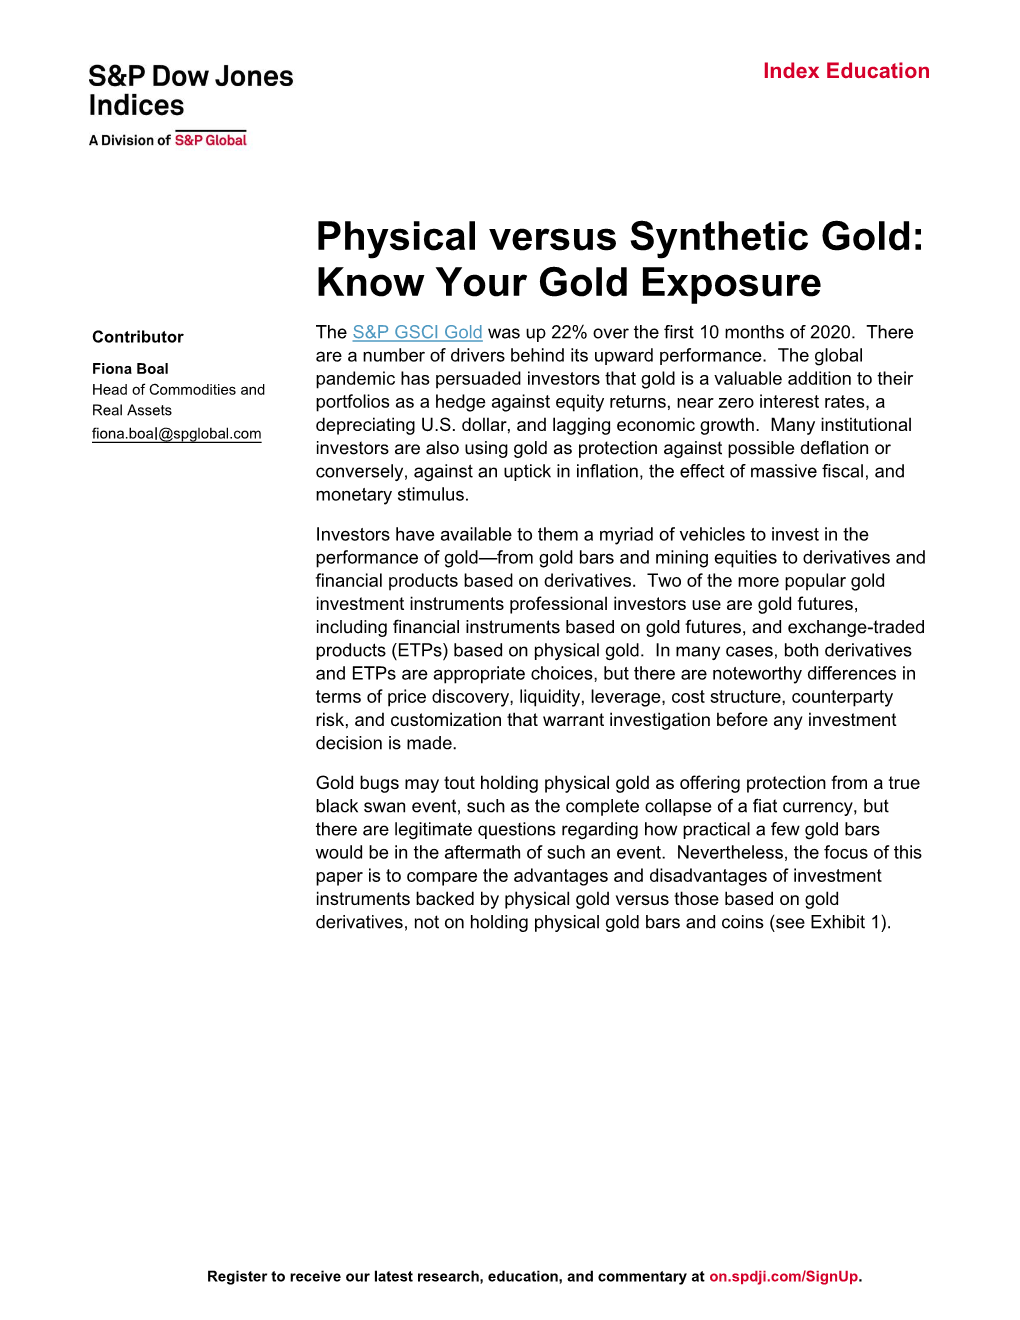 Physical Versus Synthetic Gold: Know Your Gold Exposure